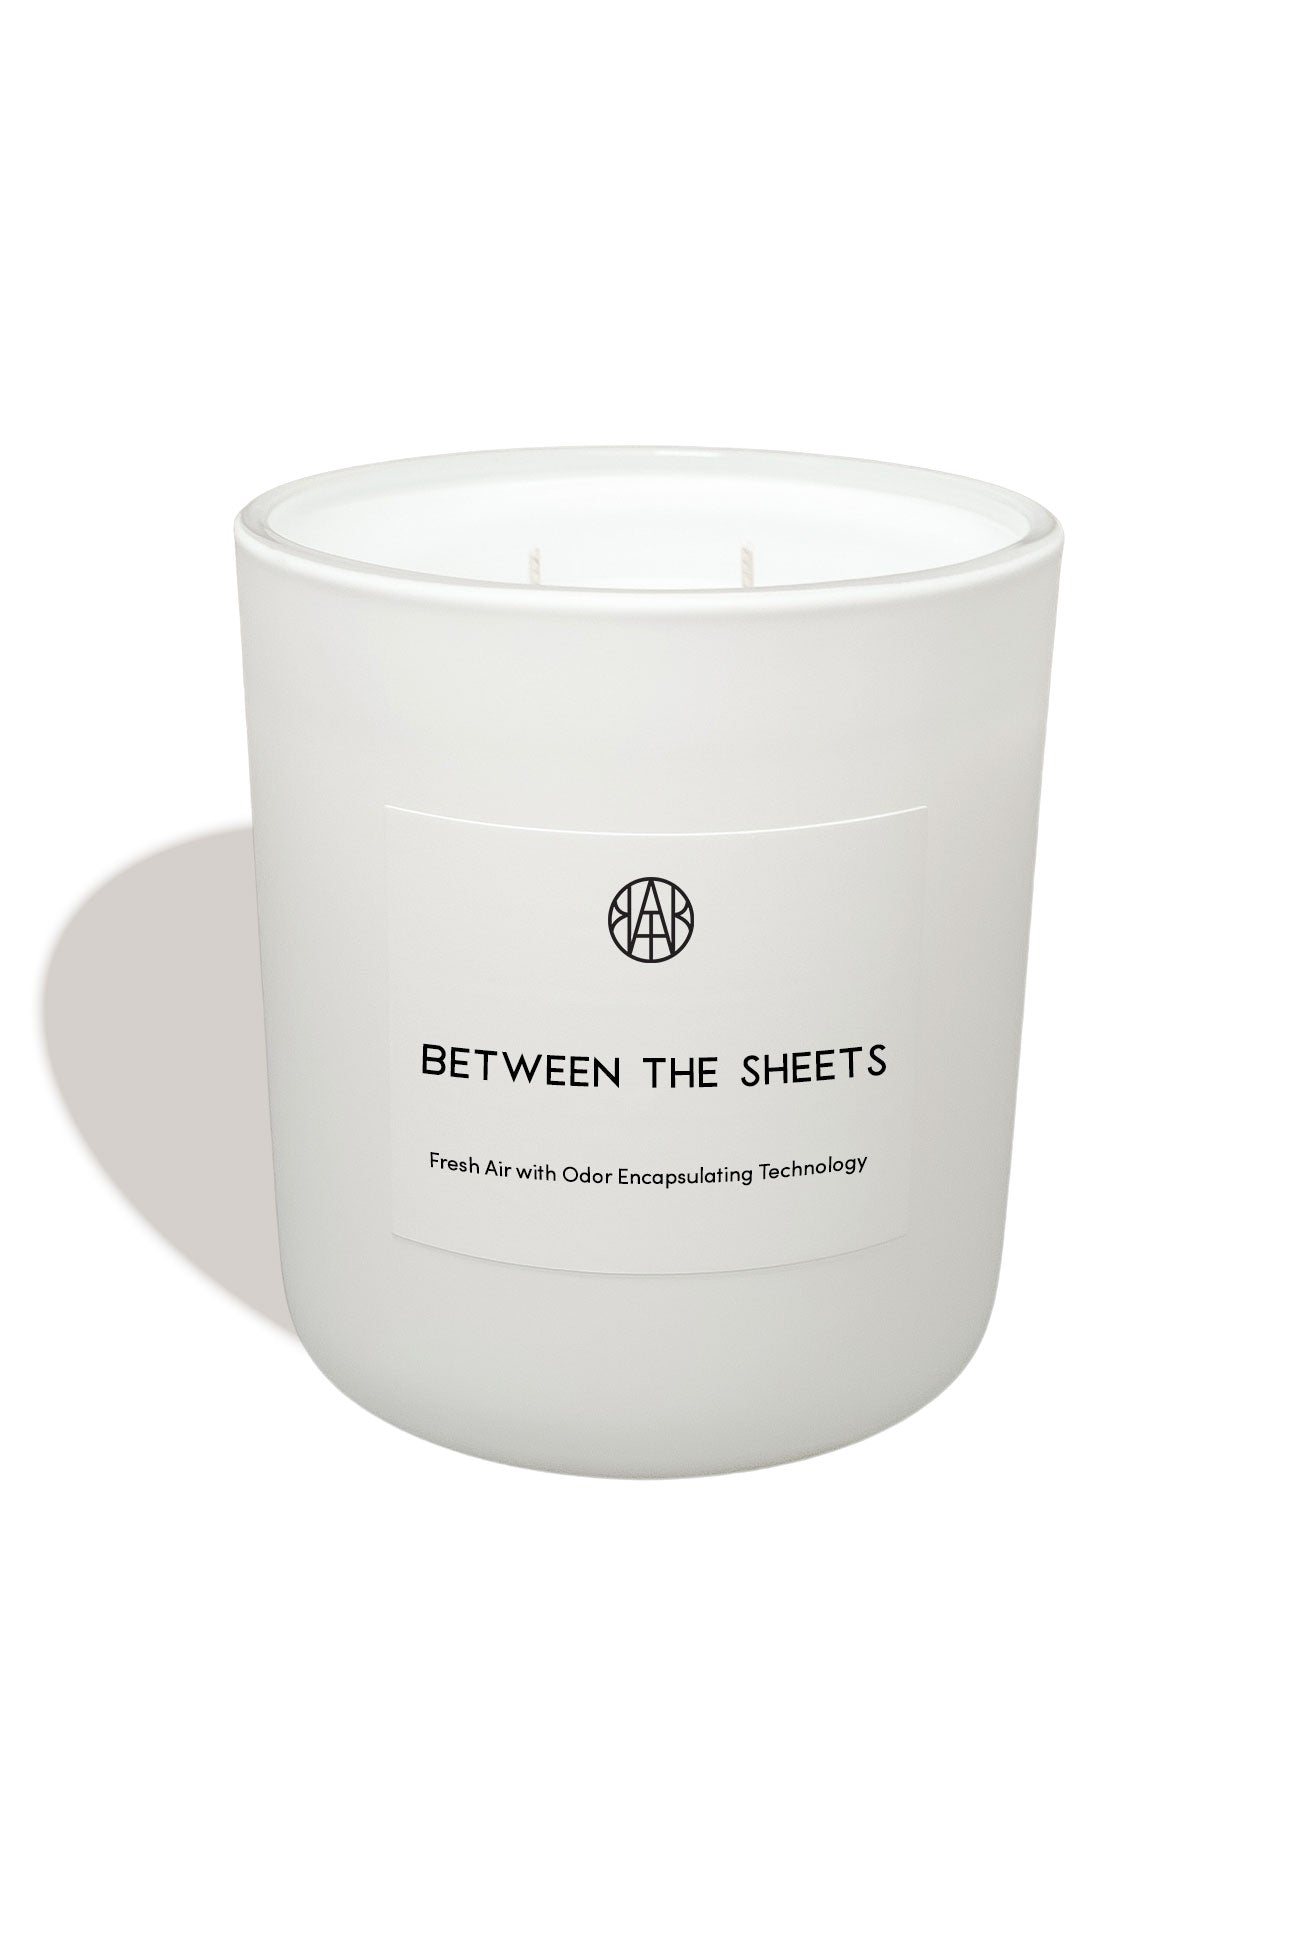 BETWEEN THE SHEETS - Deluxe Candle - AEMBR - Clean Luxury Candles, Wax Melts &amp; Laundry Care